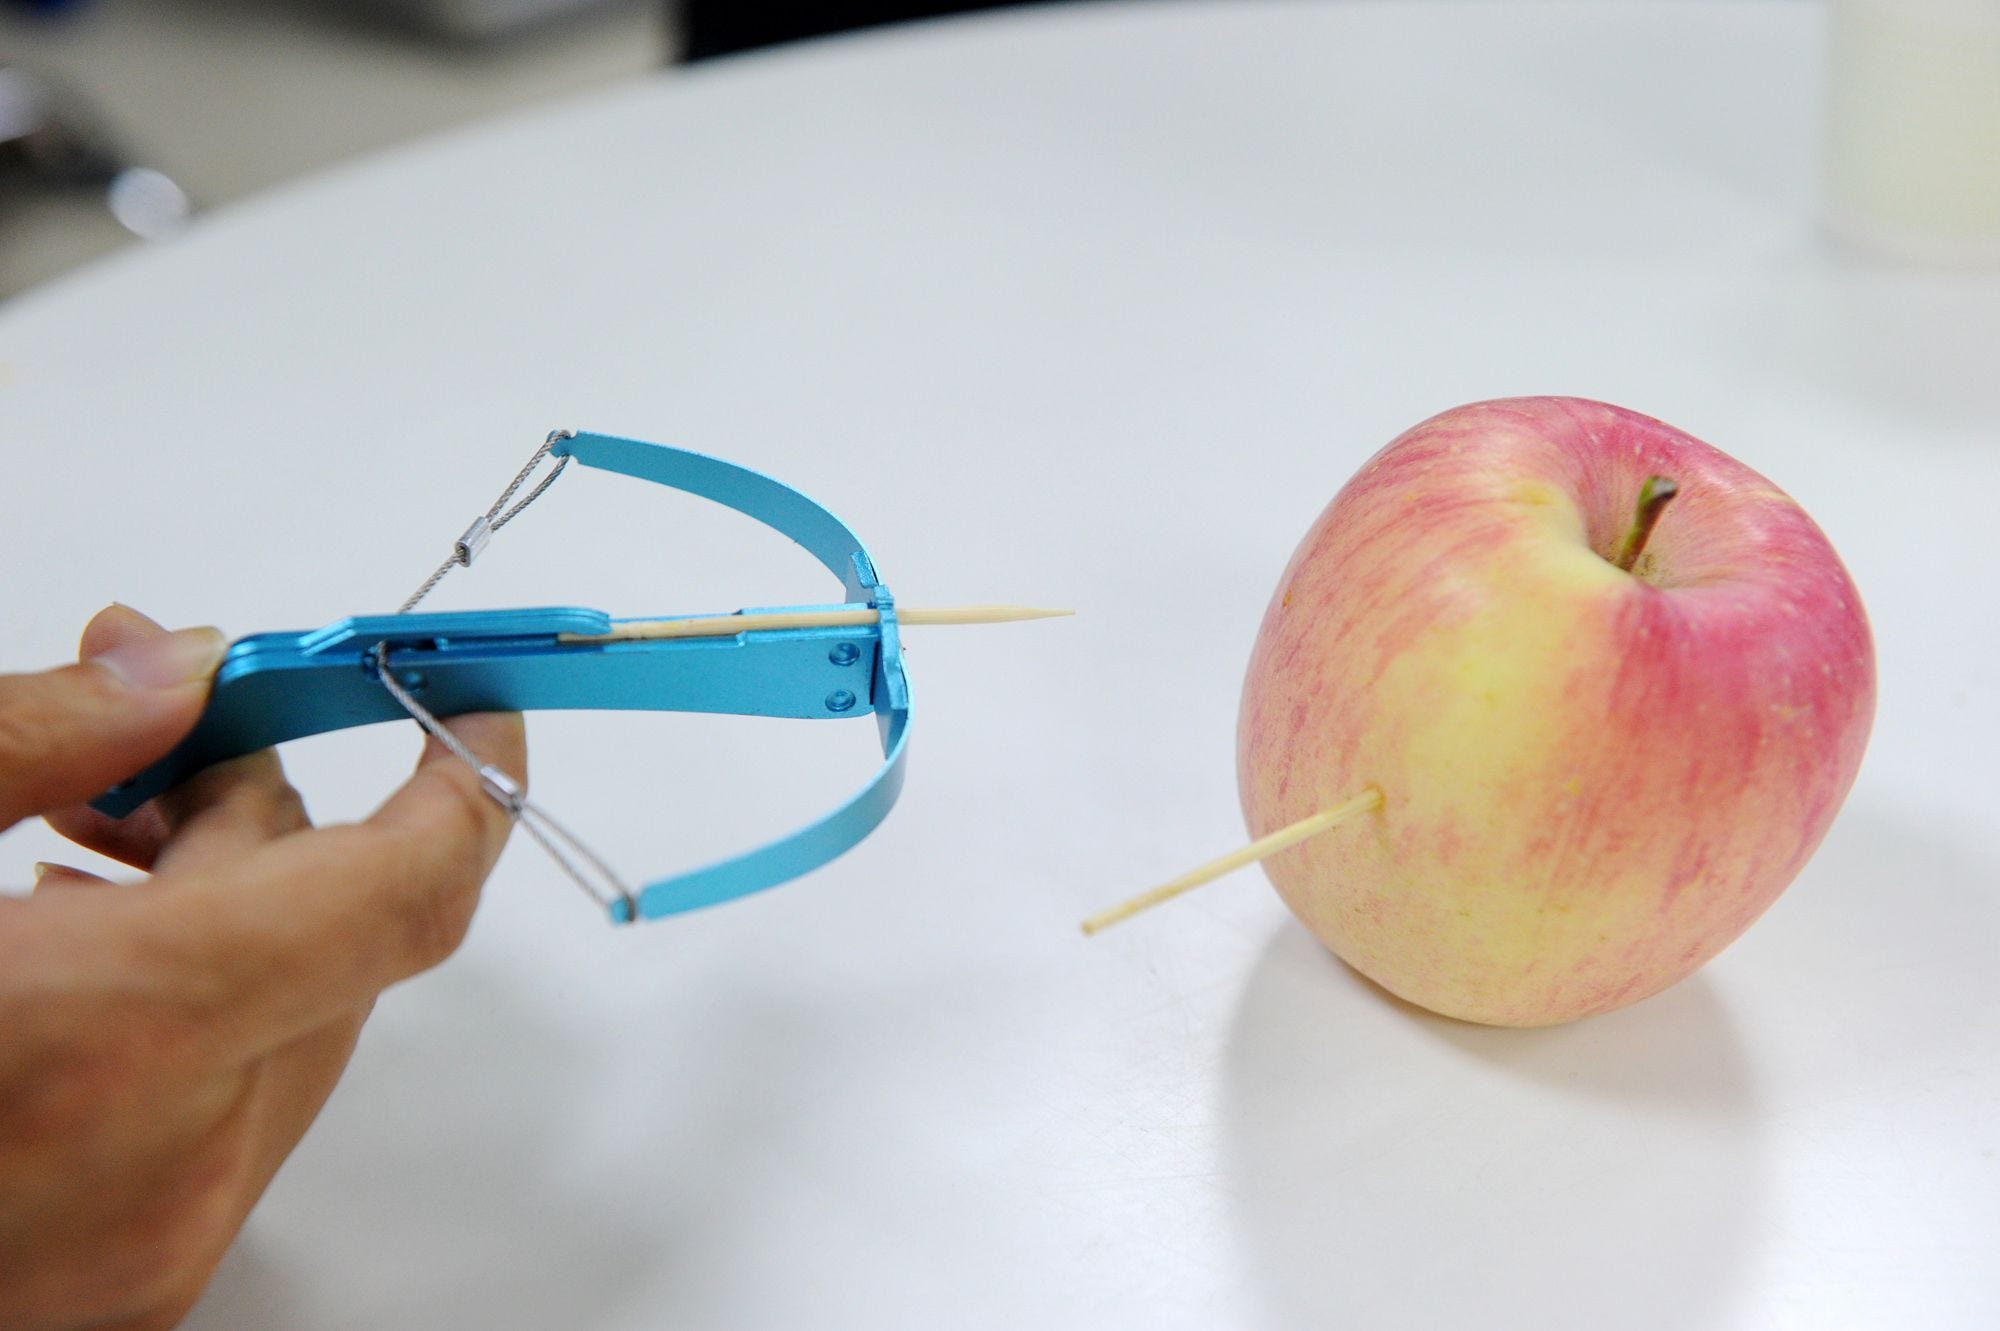 Chinese parents are freaking out over toothpick crossbow toys